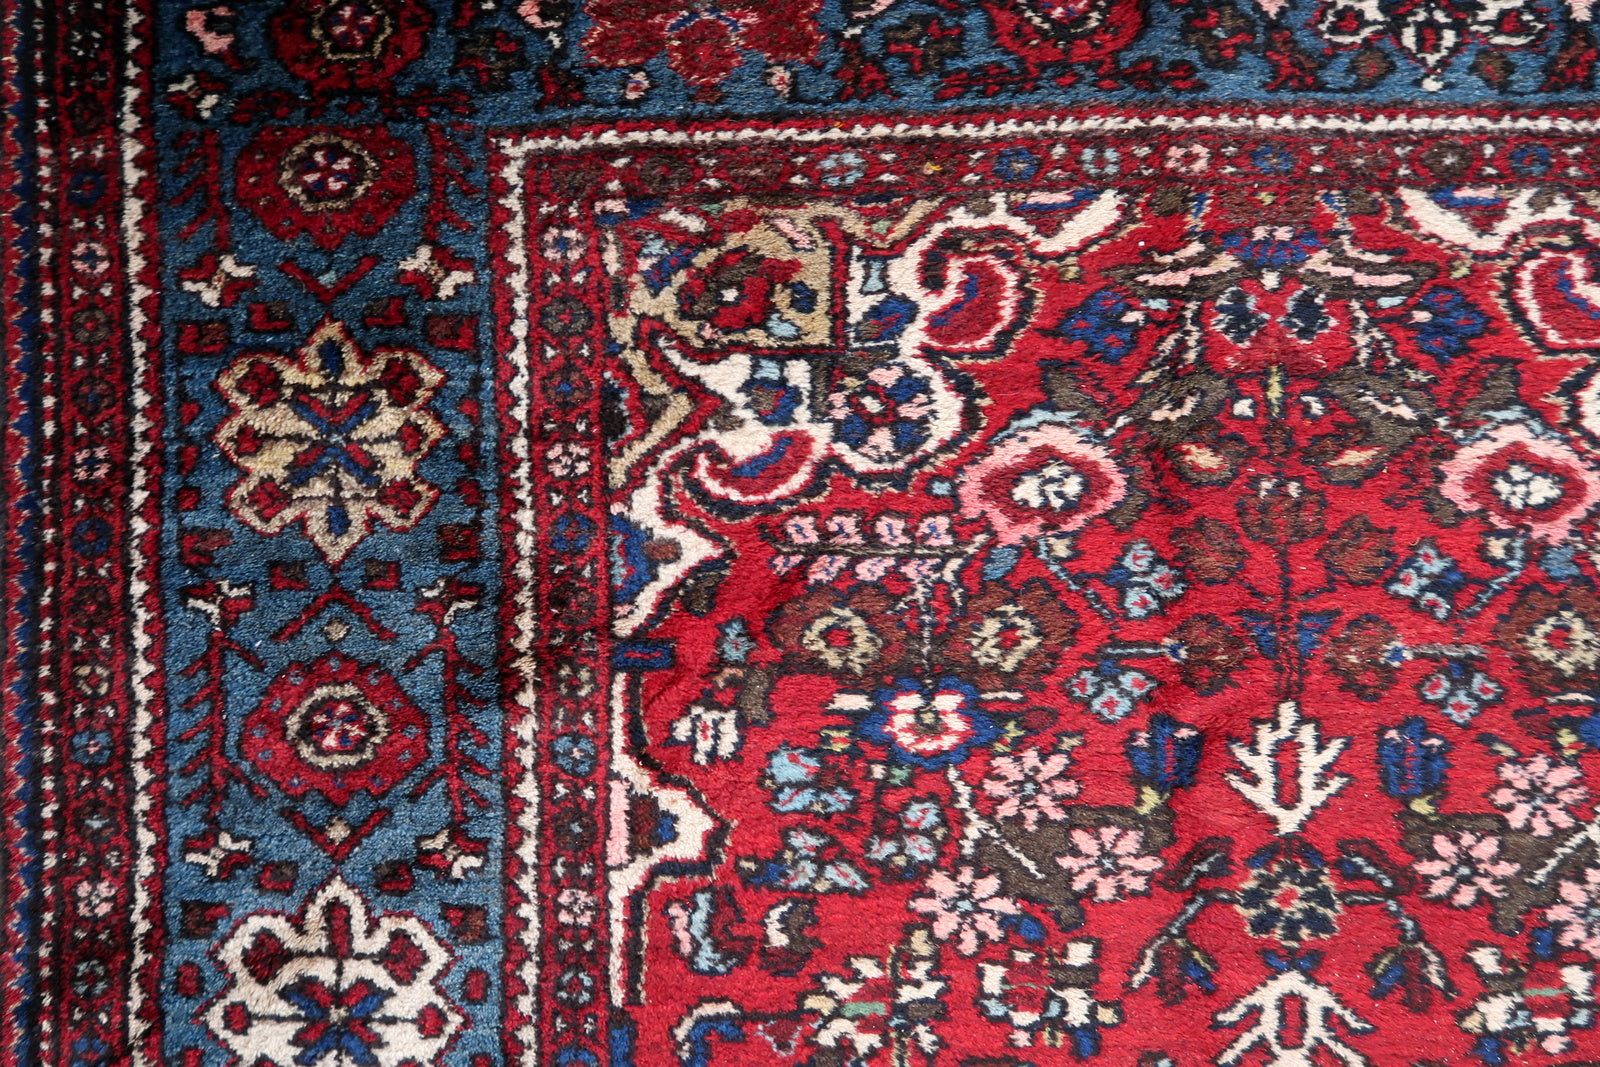 Close-up of vintage charm on Handmade Vintage Persian Malayer Rug - Detailed view showcasing the rug's vintage appeal.